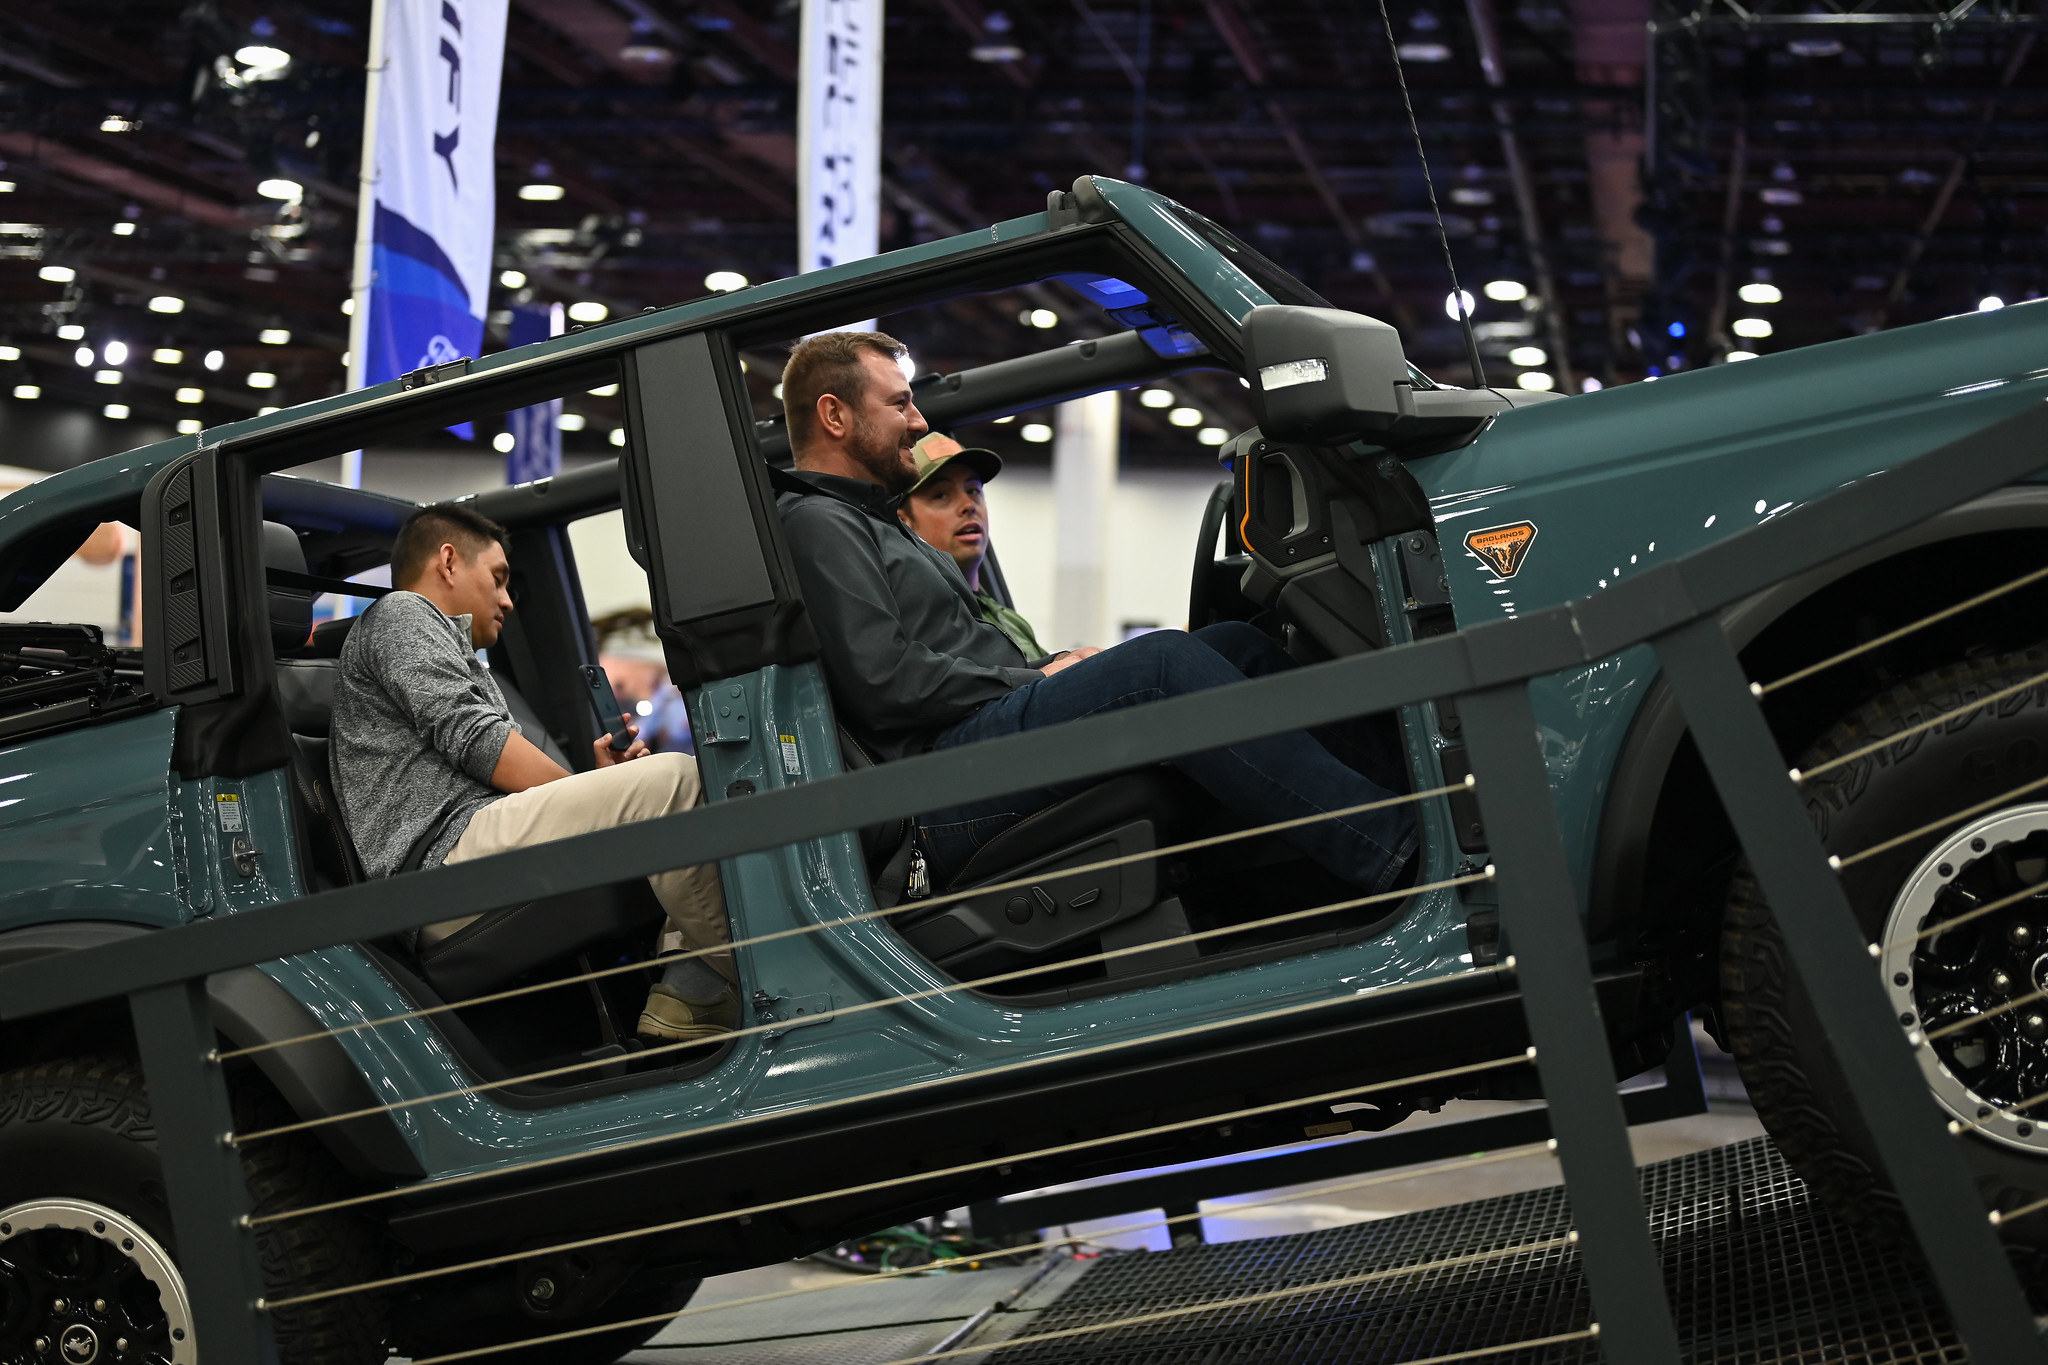 Attendees test driving a car at the Detroit Auto Show